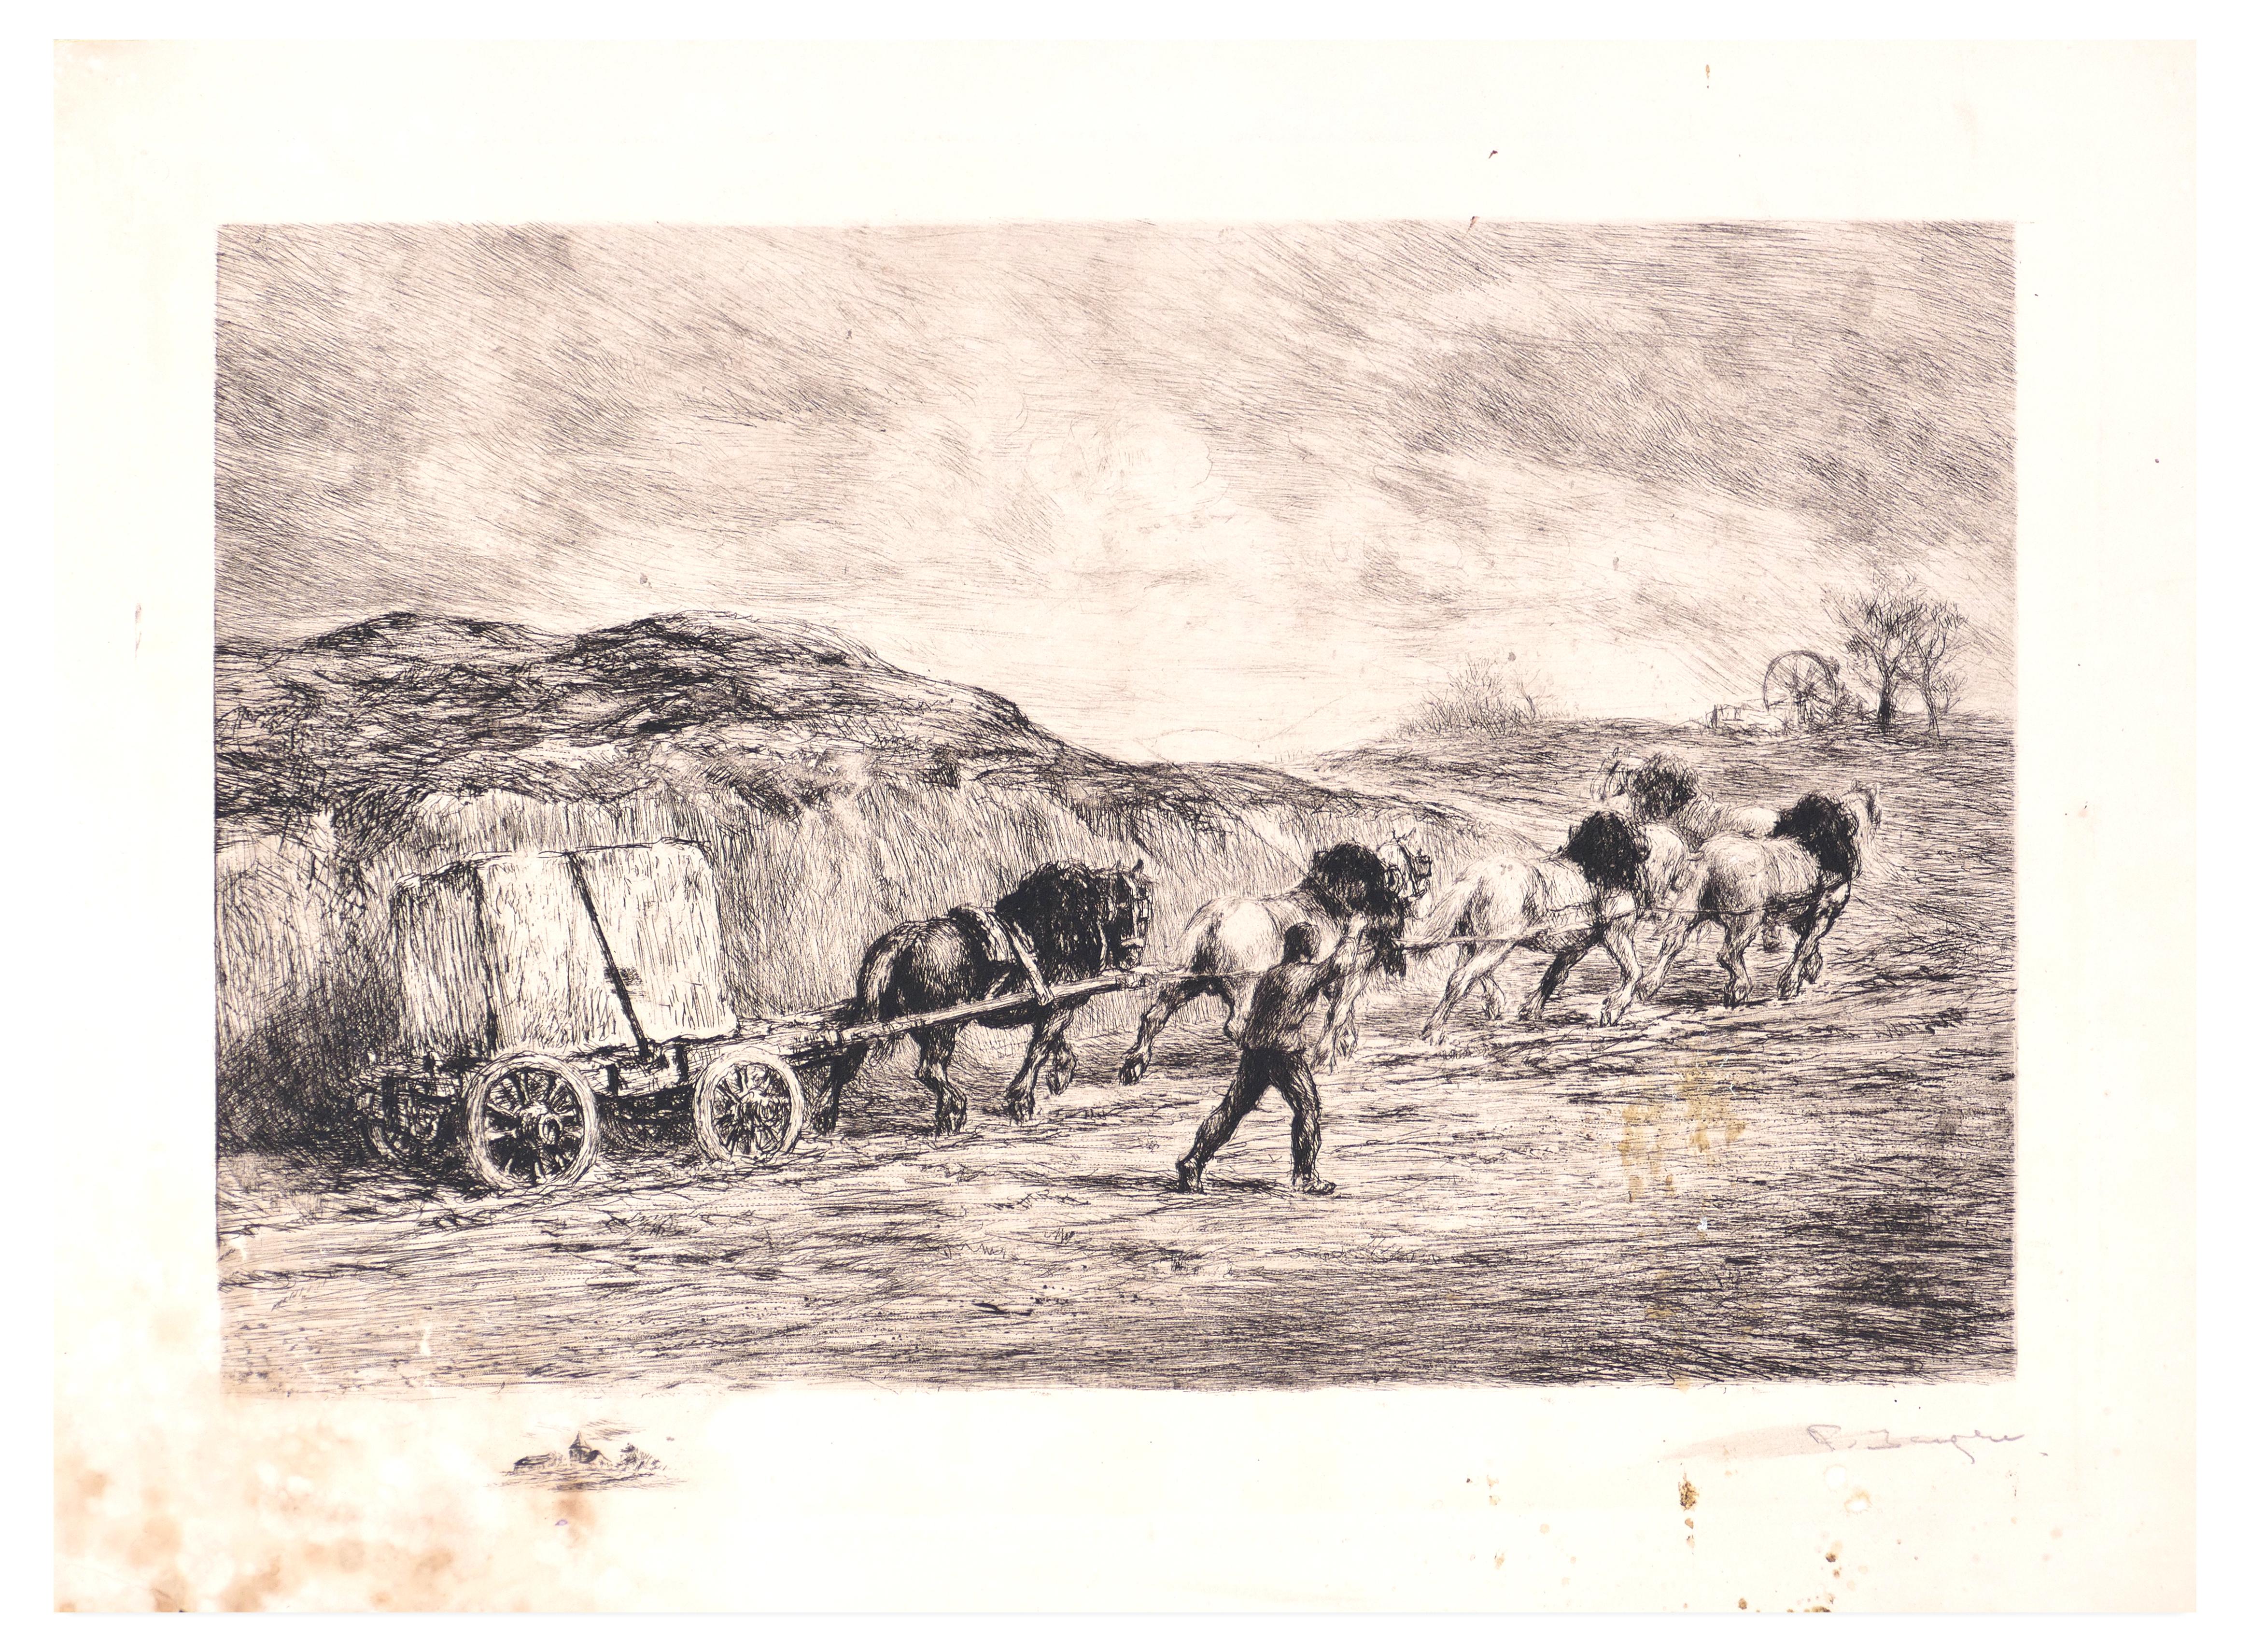 Horse Team - Original Etching by F. Jacque - Late 19th Century